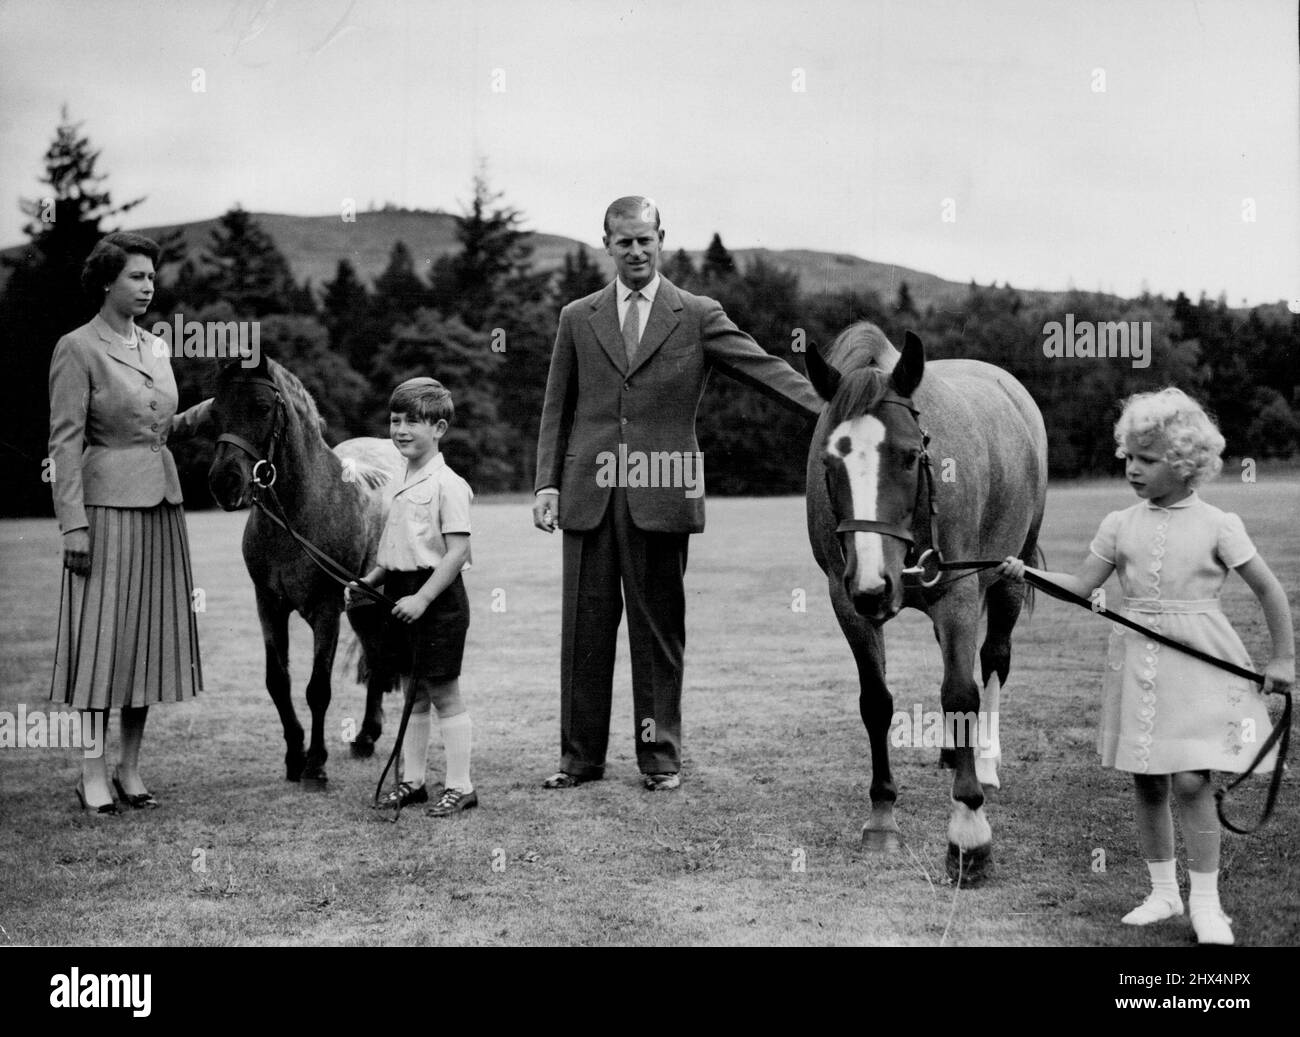 Royal Family At BalmoralQueen Elizabeth, the Duke of Edinburgh, and the children, Prince Charles and Princess Anne, exercise the ponies in the grounds of Balimoral Castle during the Royal Family's summer holiday, August 1955Prince Charles holds 'William' and Princess Anne holds 'Greensleeves.'Balmoral Castle, the private property of the sovereign, on deside in West Aberdeenshire, Scotland, was Queen Victoria's favourite residence. Prince Albert bought the 11,000-Acre estate in 1852 for £ 31,500 and the Castle was rebuilt three years later. September 26, 1955. (Photo by James Reid, Associated P Stock Photo